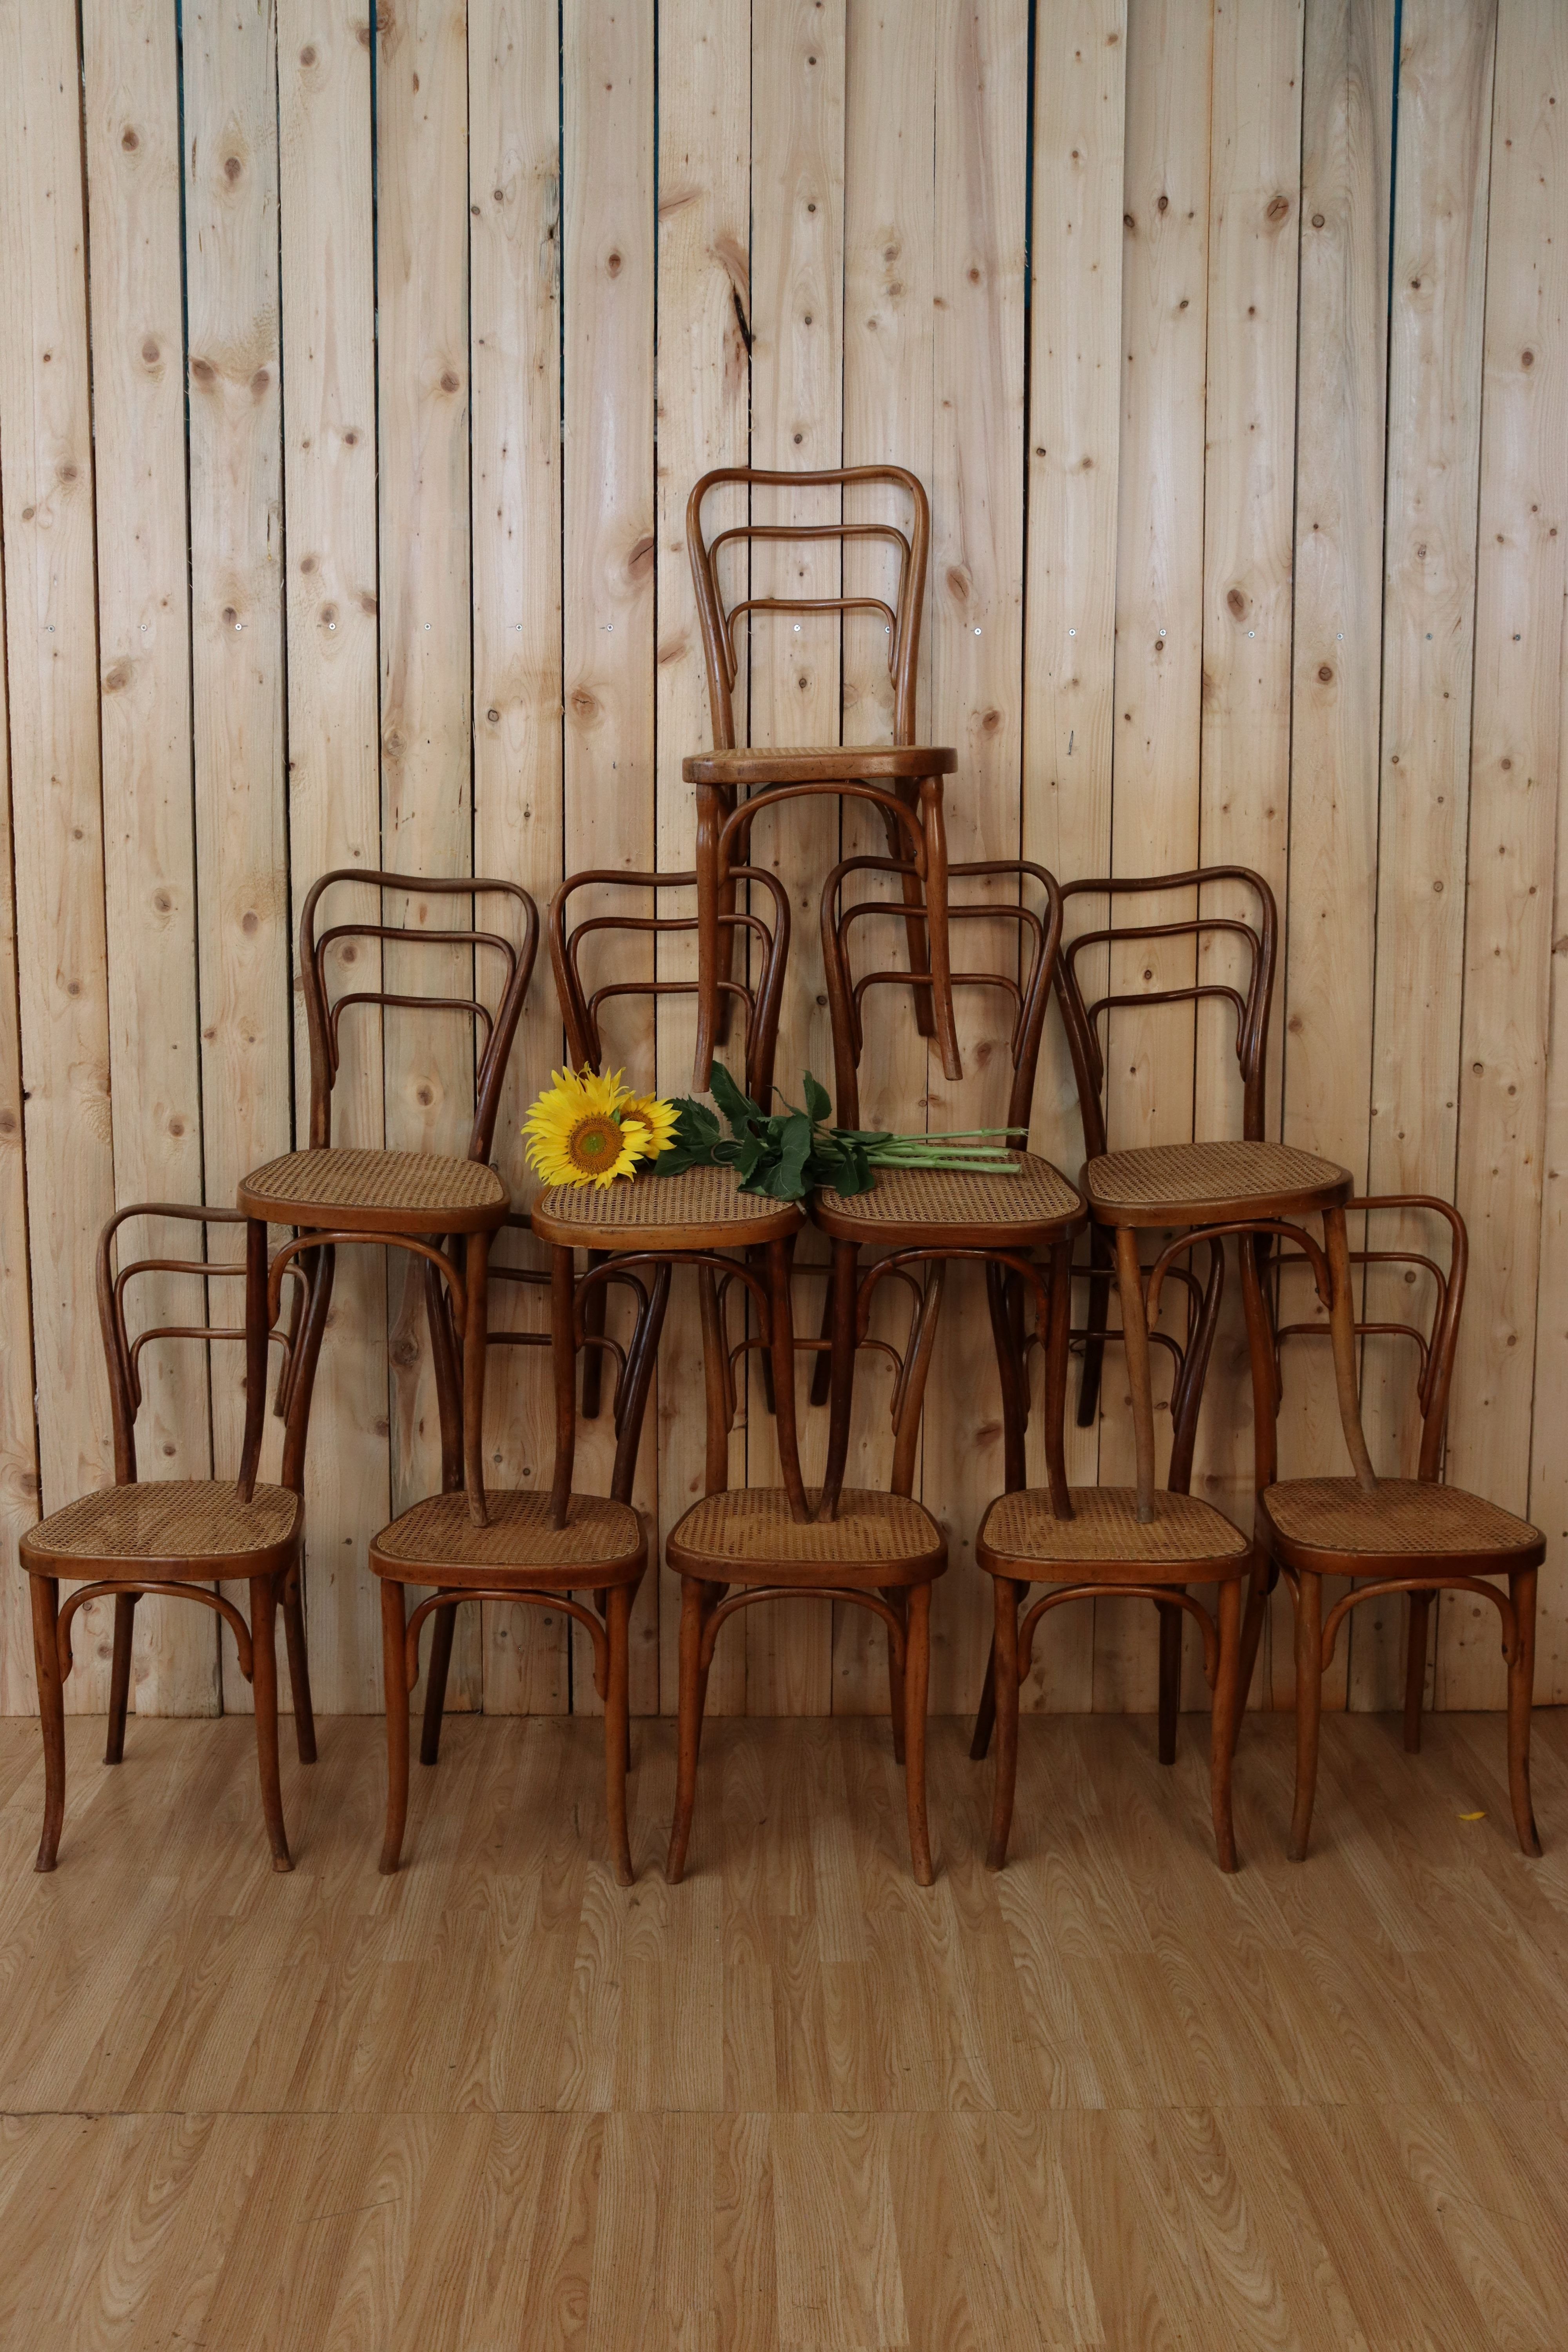 rare series of 10 chairs from the kohn model house created in 1906 under the number 248 A all are in very good condition as well as their canes